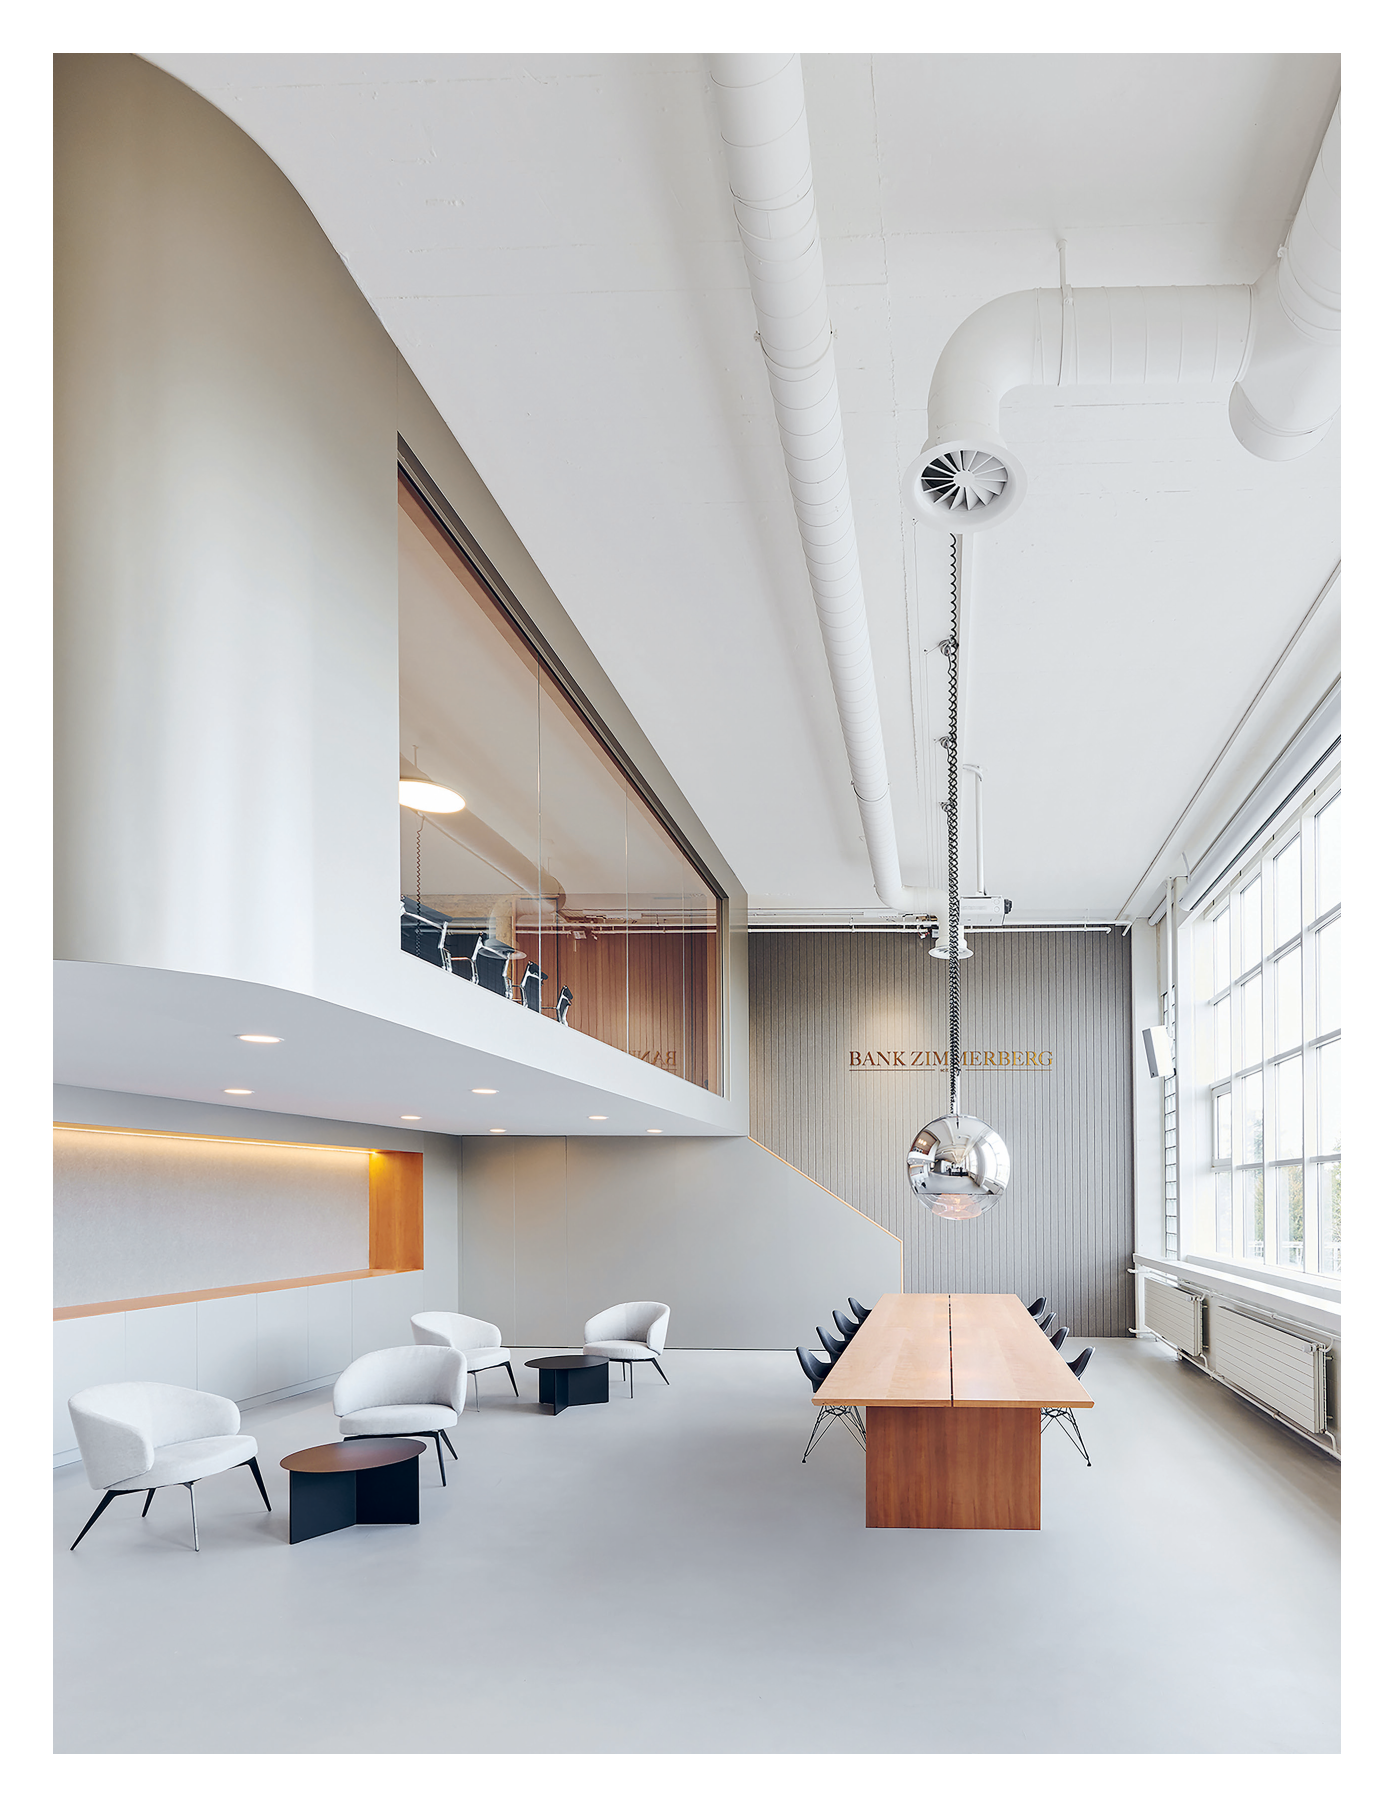 Spect­rooms Mint Architecture Bank Zimmerberg Banking Workplace